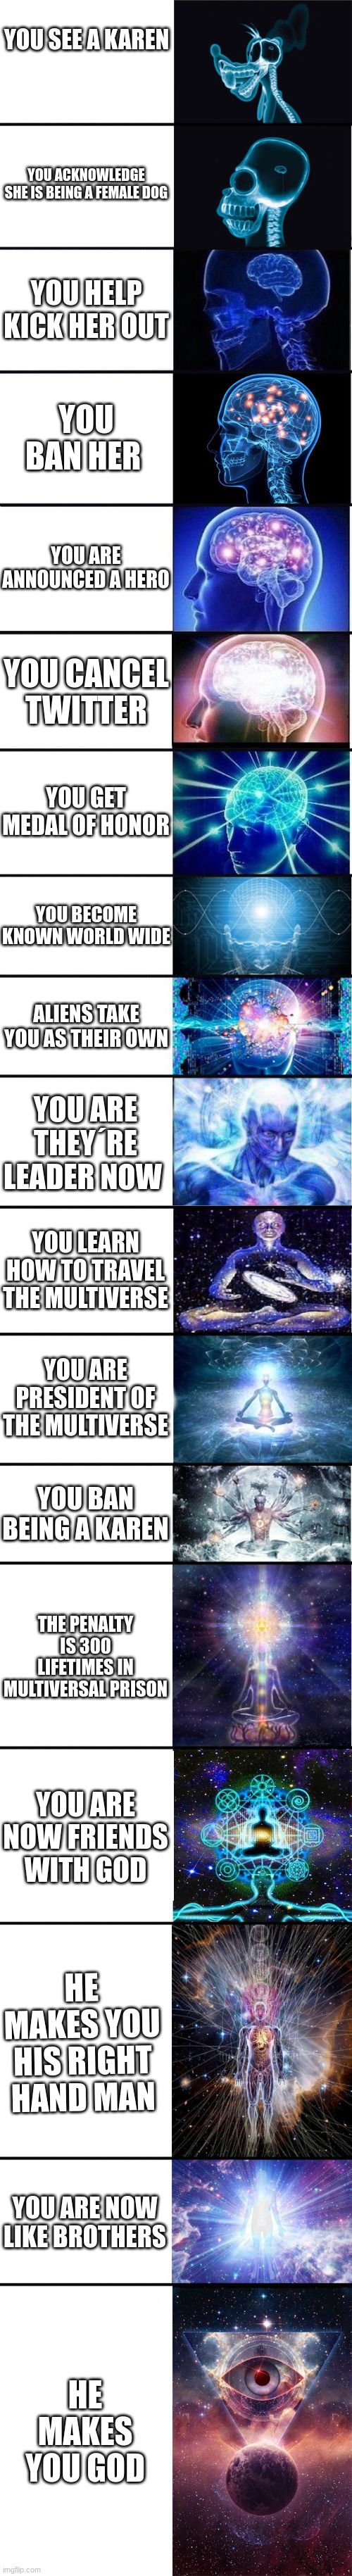 the ultimate experience | YOU SEE A KAREN; YOU ACKNOWLEDGE SHE IS BEING A FEMALE DOG; YOU HELP KICK HER OUT; YOU BAN HER; YOU ARE ANNOUNCED A HERO; YOU CANCEL TWITTER; YOU GET MEDAL OF HONOR; YOU BECOME KNOWN WORLD WIDE; ALIENS TAKE YOU AS THEIR OWN; YOU ARE THEY´RE LEADER NOW; YOU LEARN HOW TO TRAVEL THE MULTIVERSE; YOU ARE PRESIDENT OF THE MULTIVERSE; YOU BAN BEING A KAREN; THE PENALTY IS 300 LIFETIMES IN MULTIVERSAL PRISON; YOU ARE NOW FRIENDS WITH GOD; HE MAKES YOU HIS RIGHT HAND MAN; YOU ARE NOW LIKE BROTHERS; HE MAKES YOU GOD | image tagged in expanding brain 9001 | made w/ Imgflip meme maker